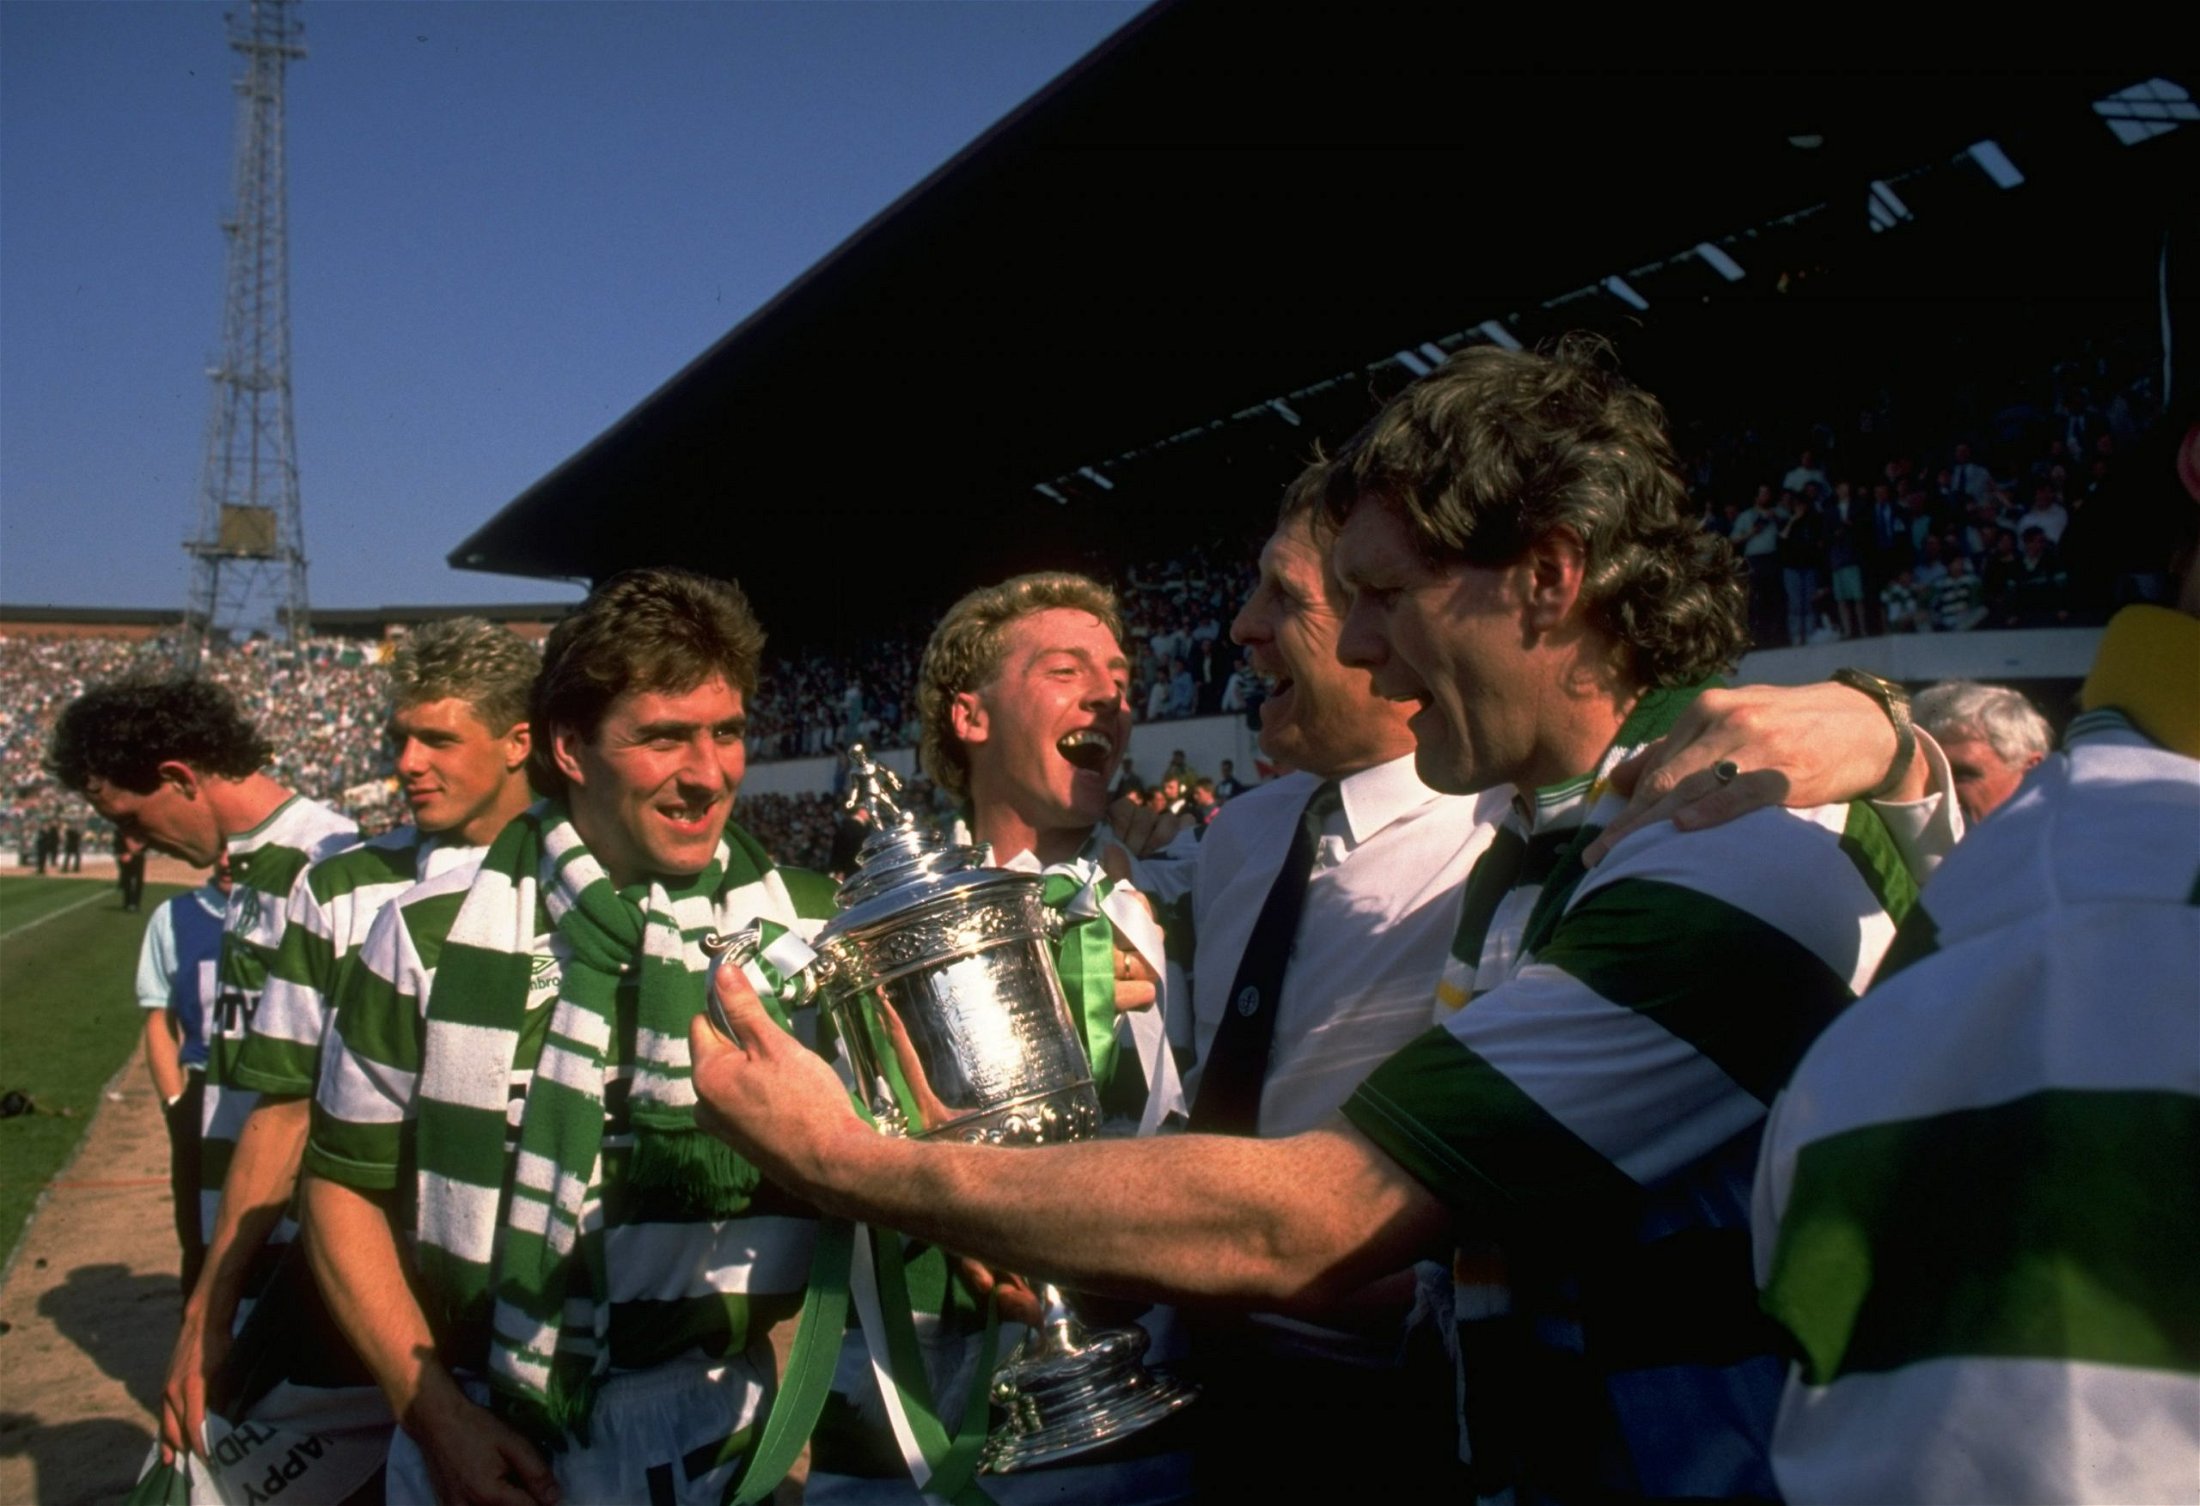 Who were Celtic s opponents when this picture was taken? Read Celtic